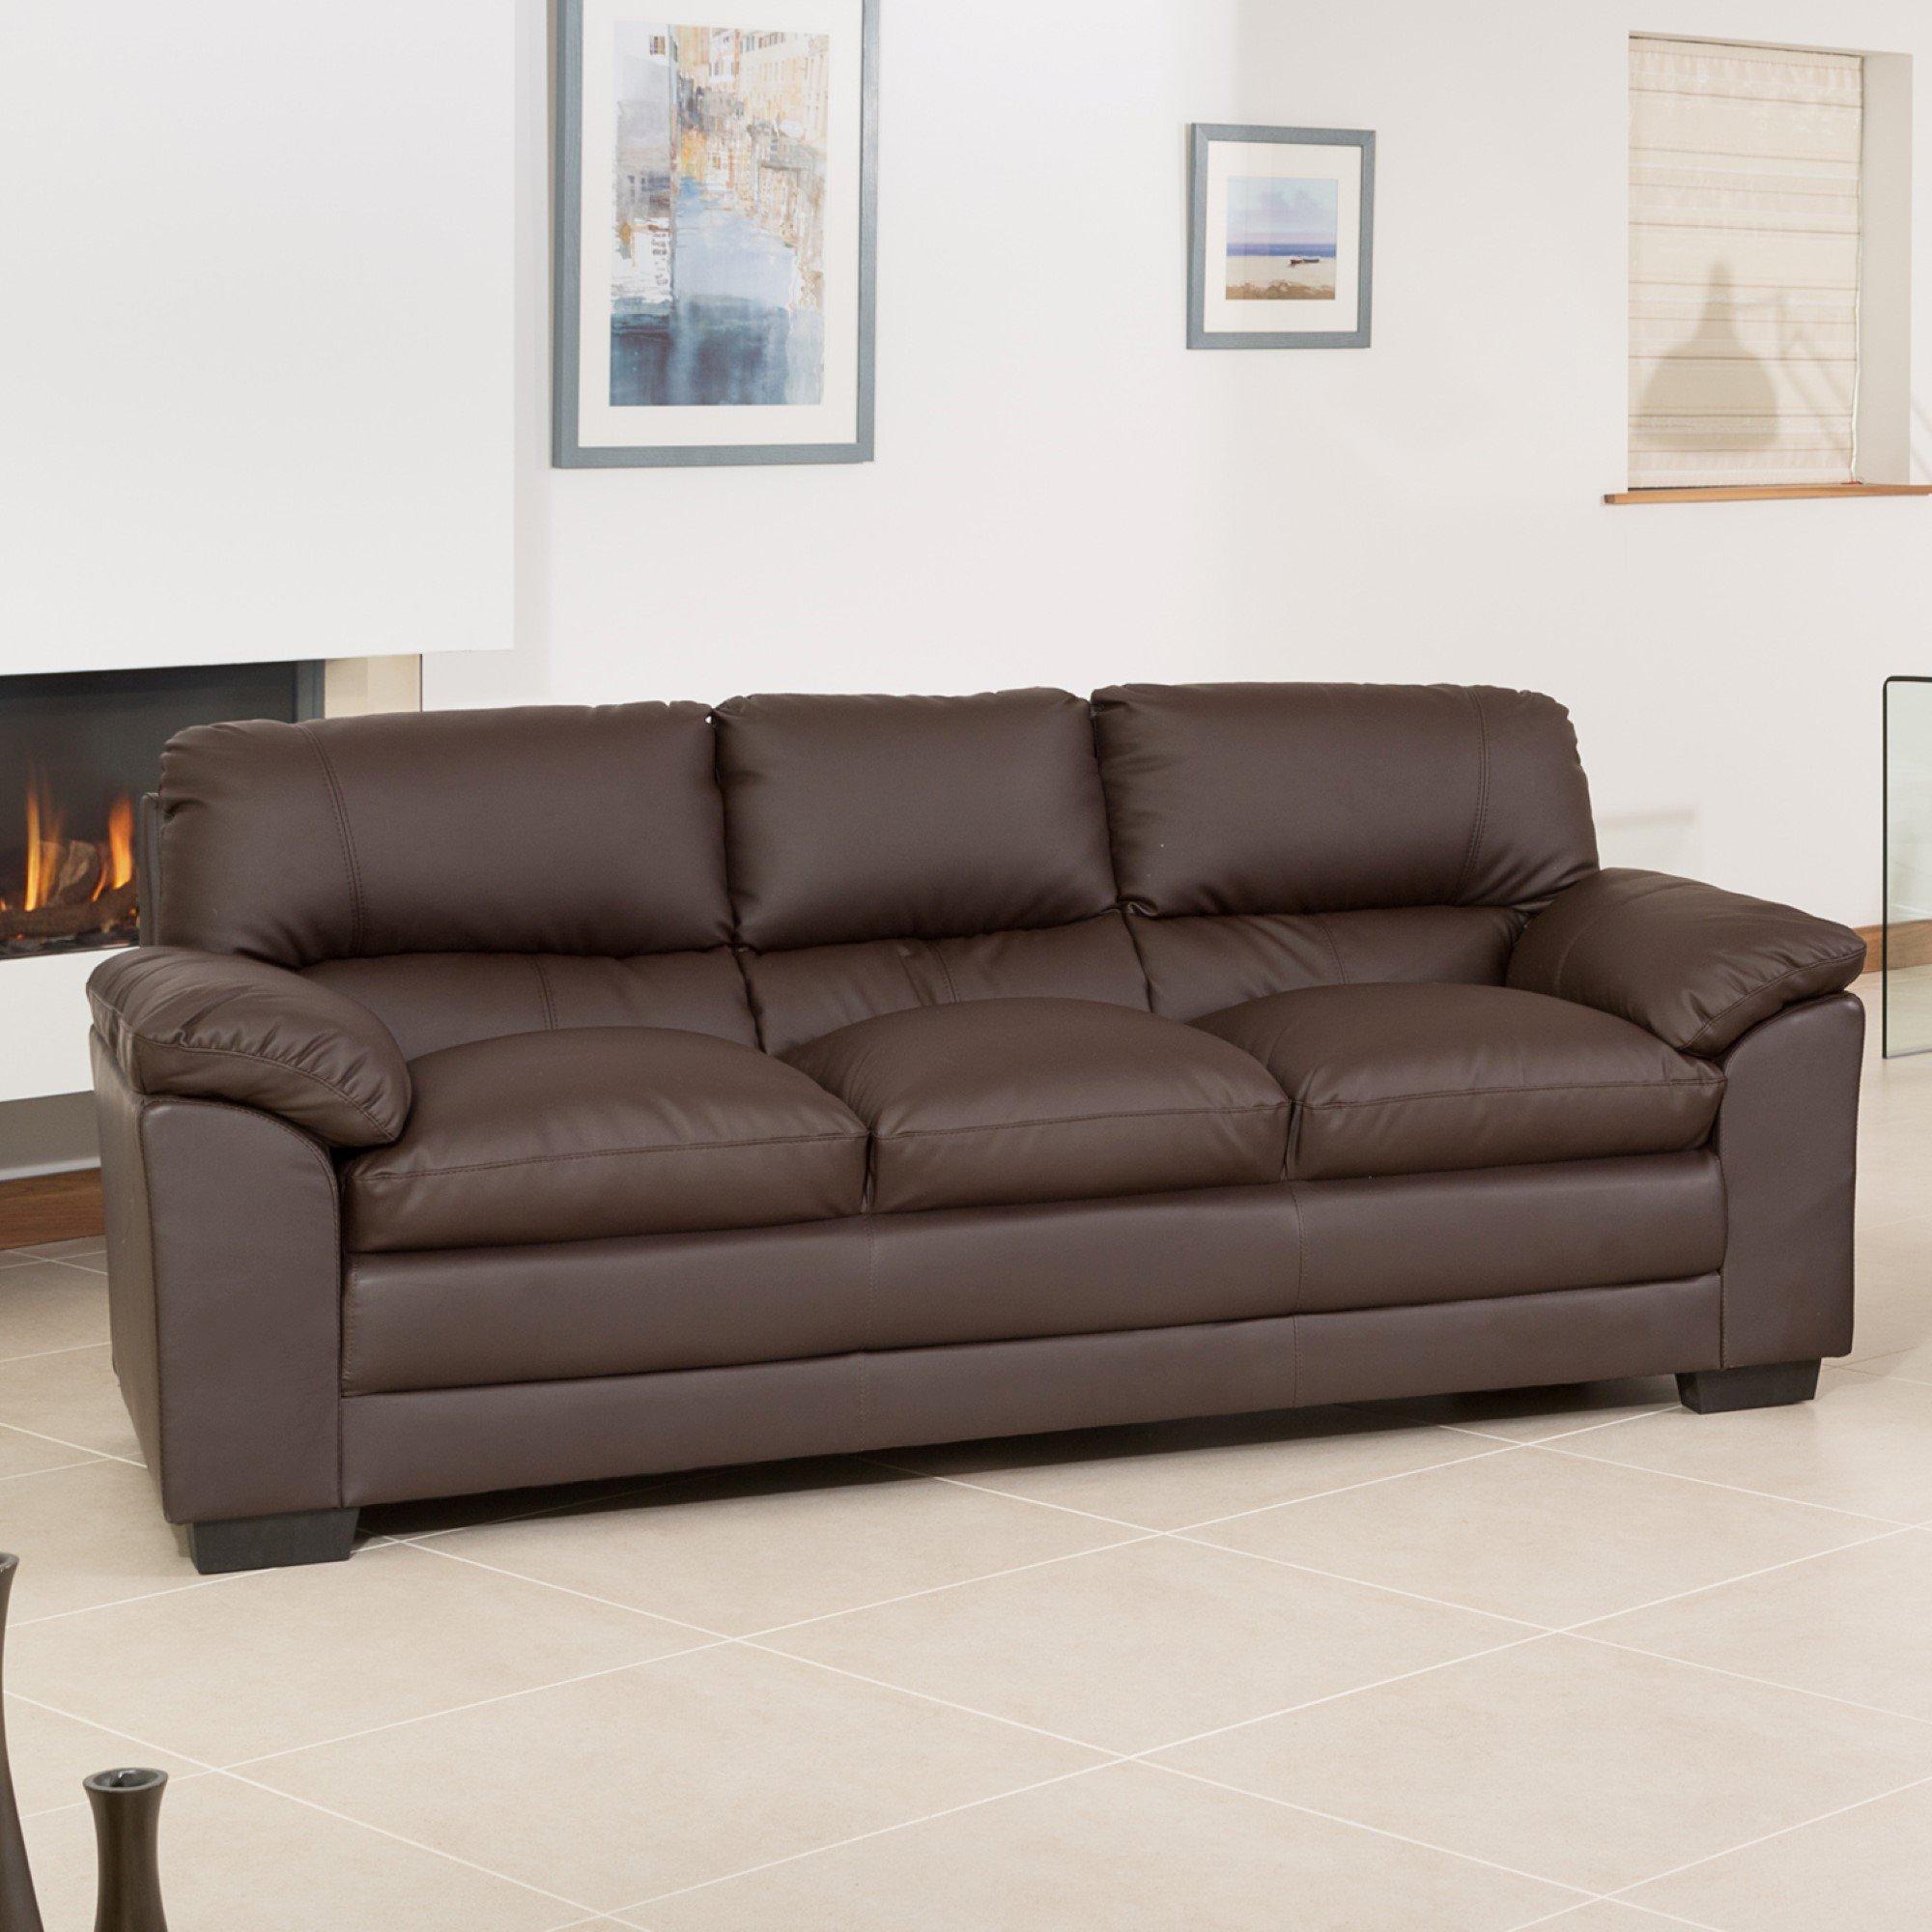 Genoa 3 Seat Sofabed